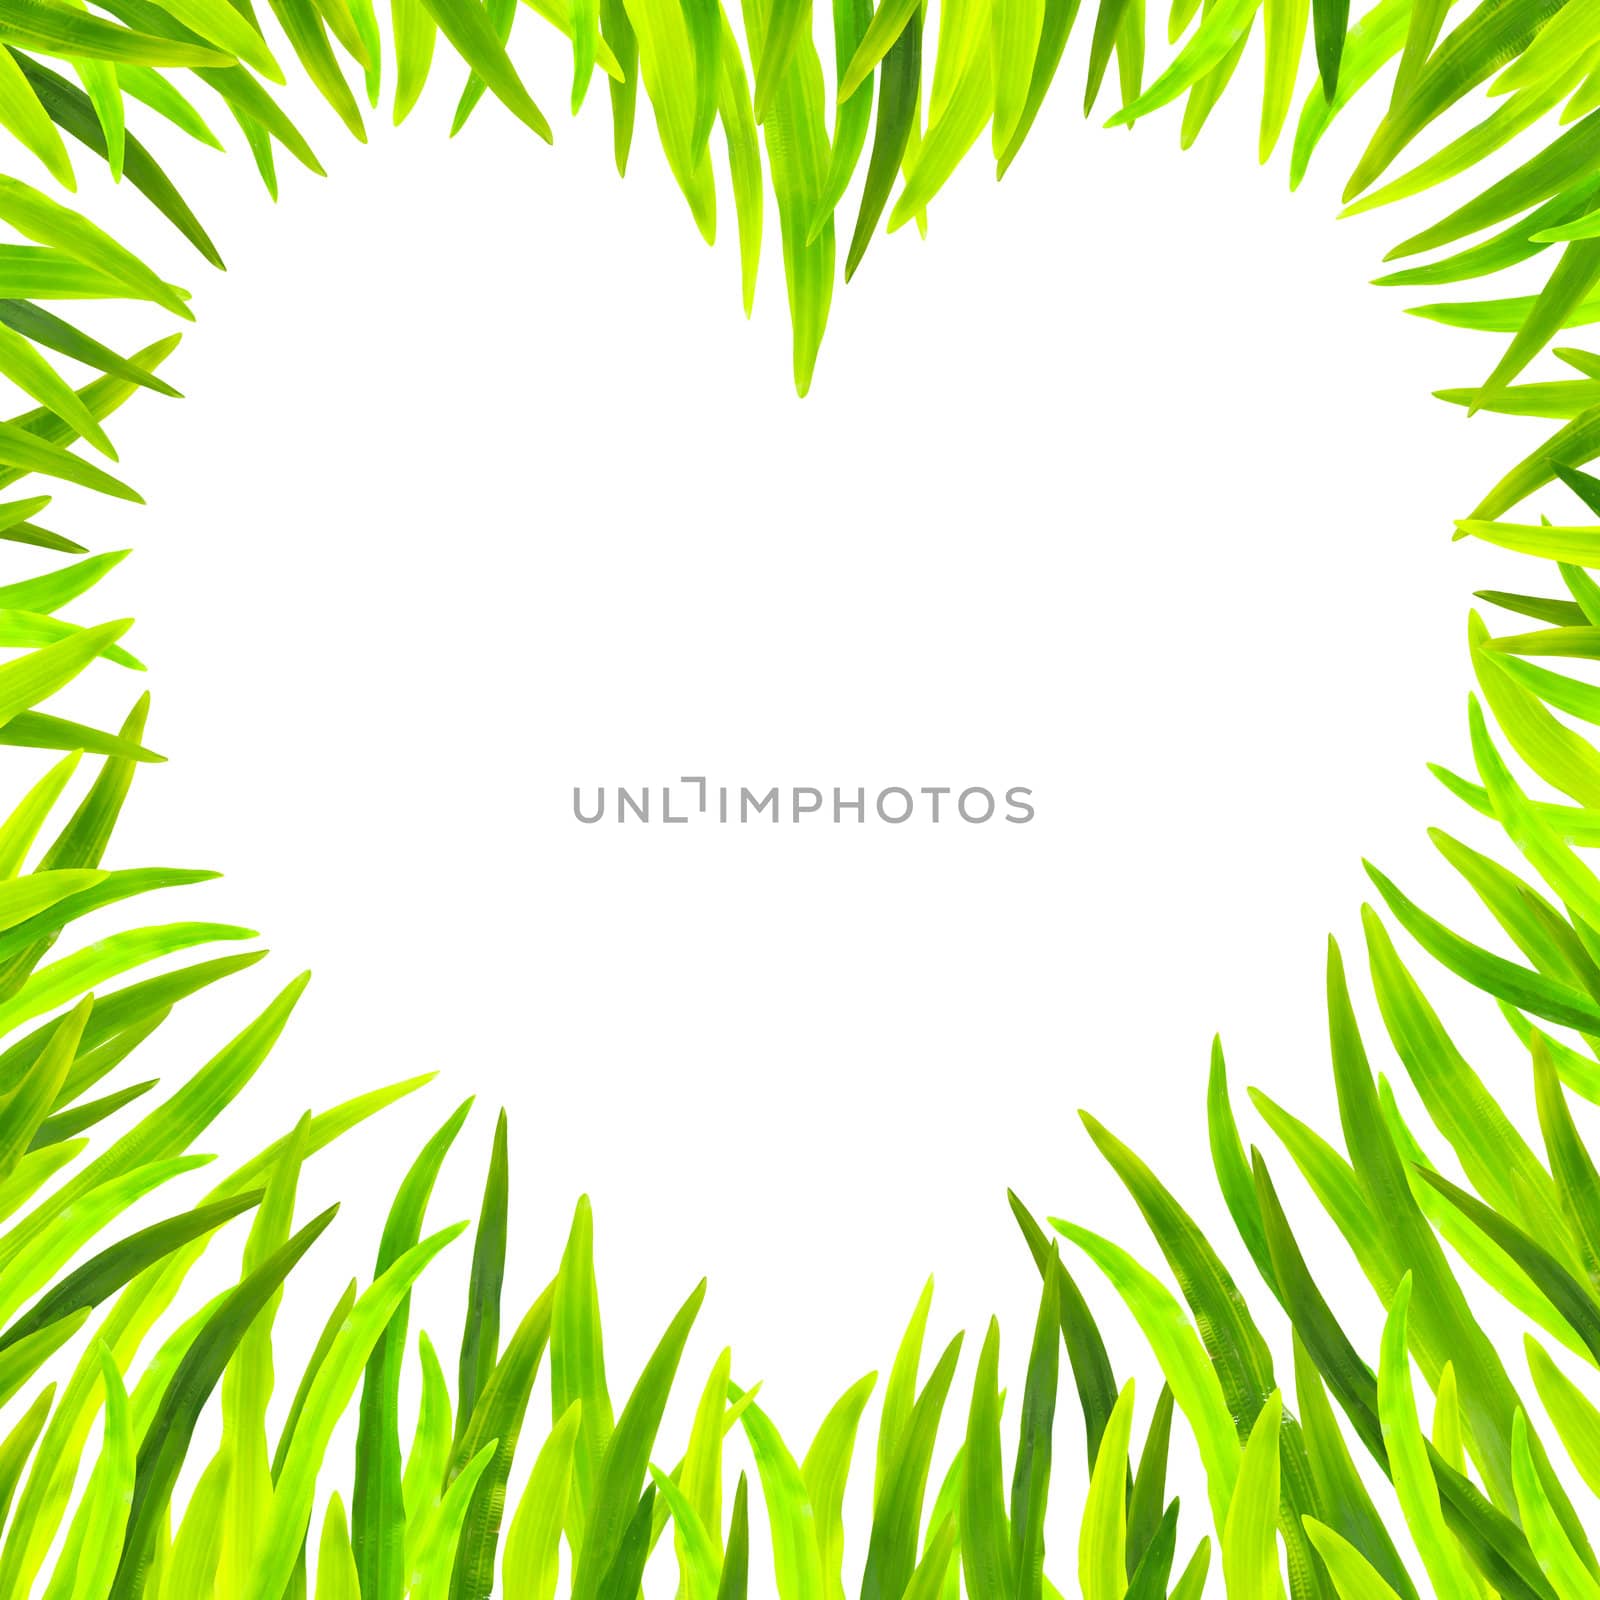 Grass heart-shaped frame in white background .